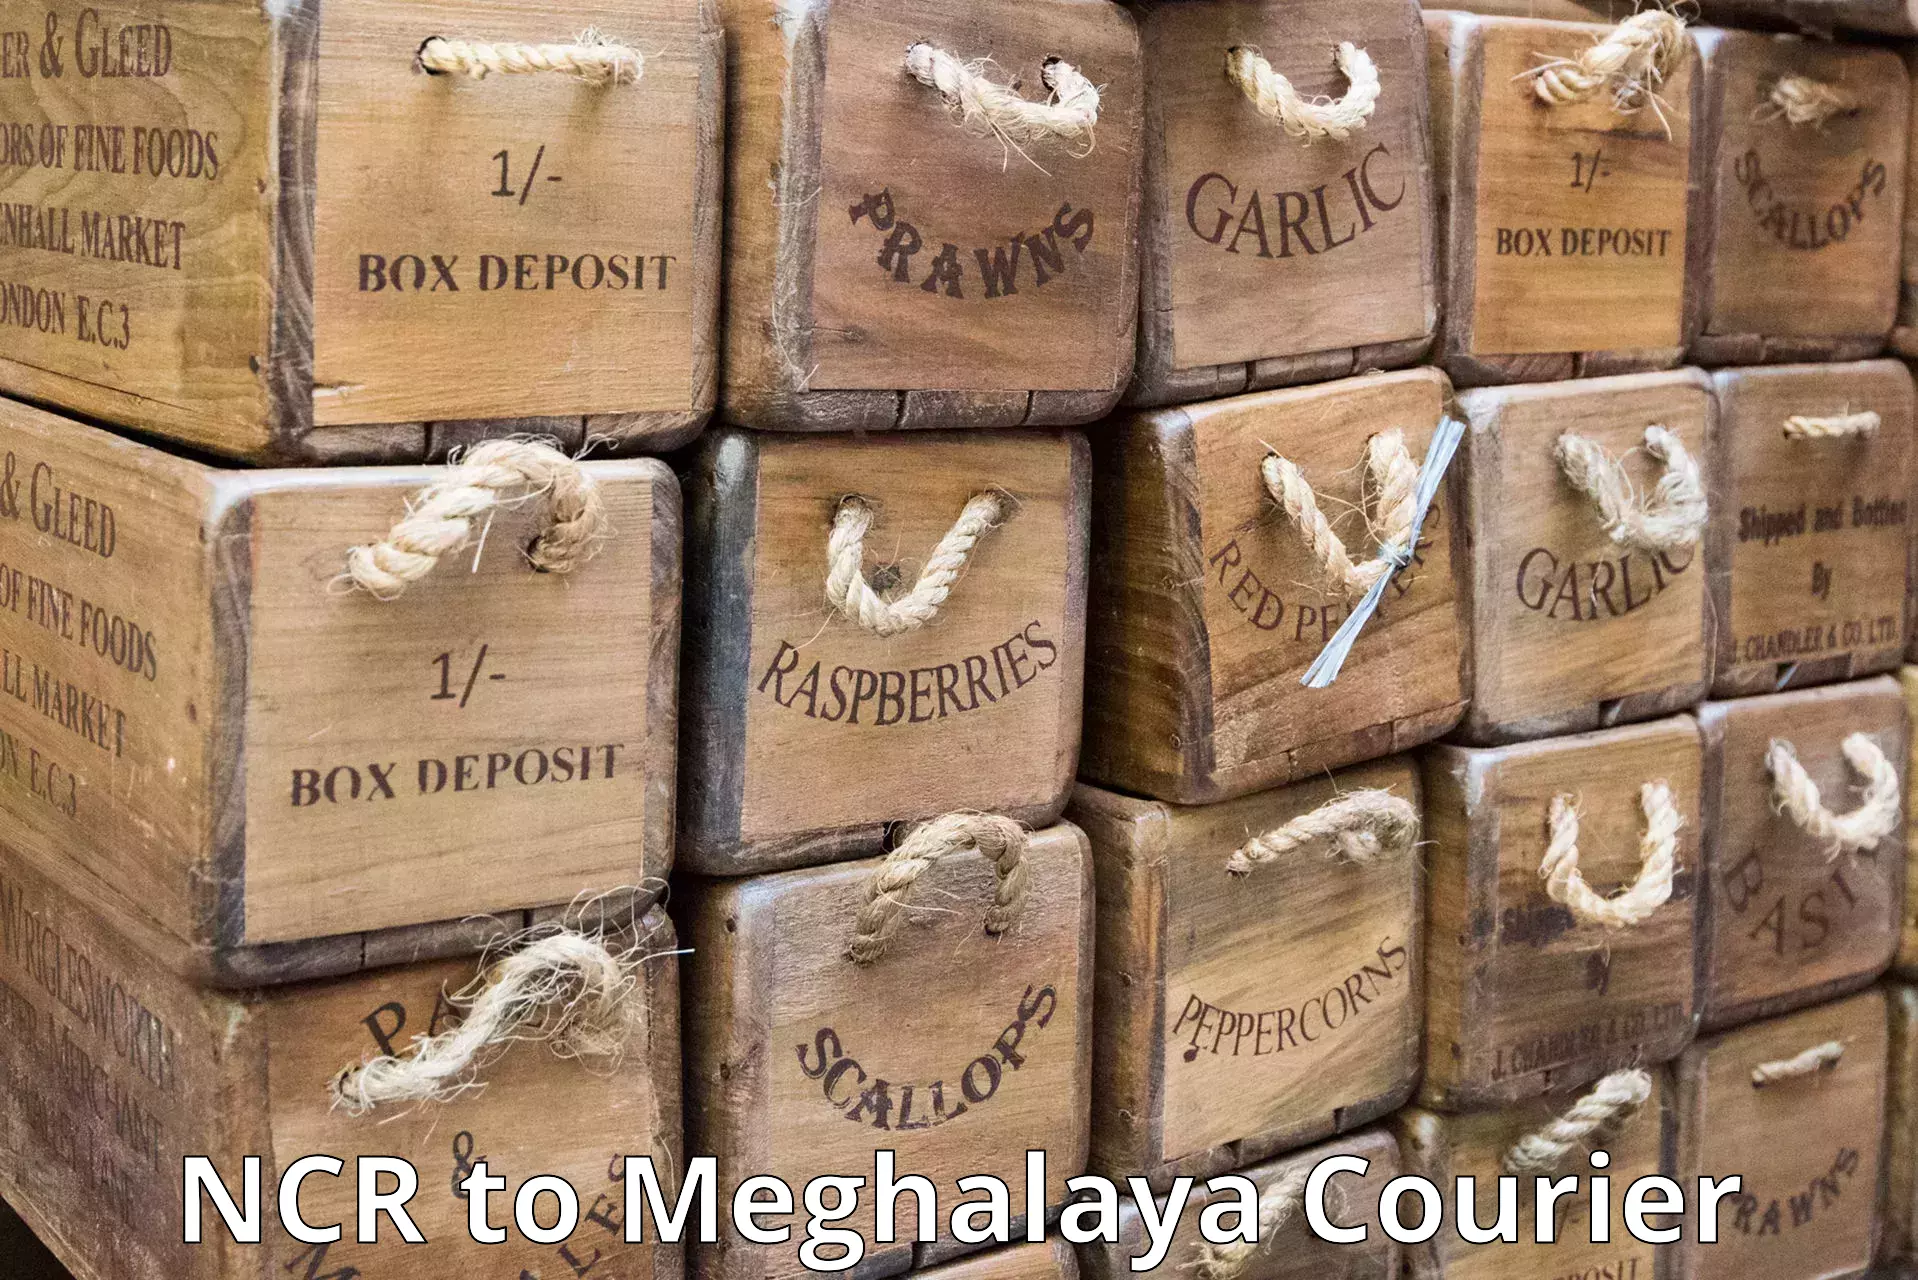 Cash on delivery service NCR to Meghalaya